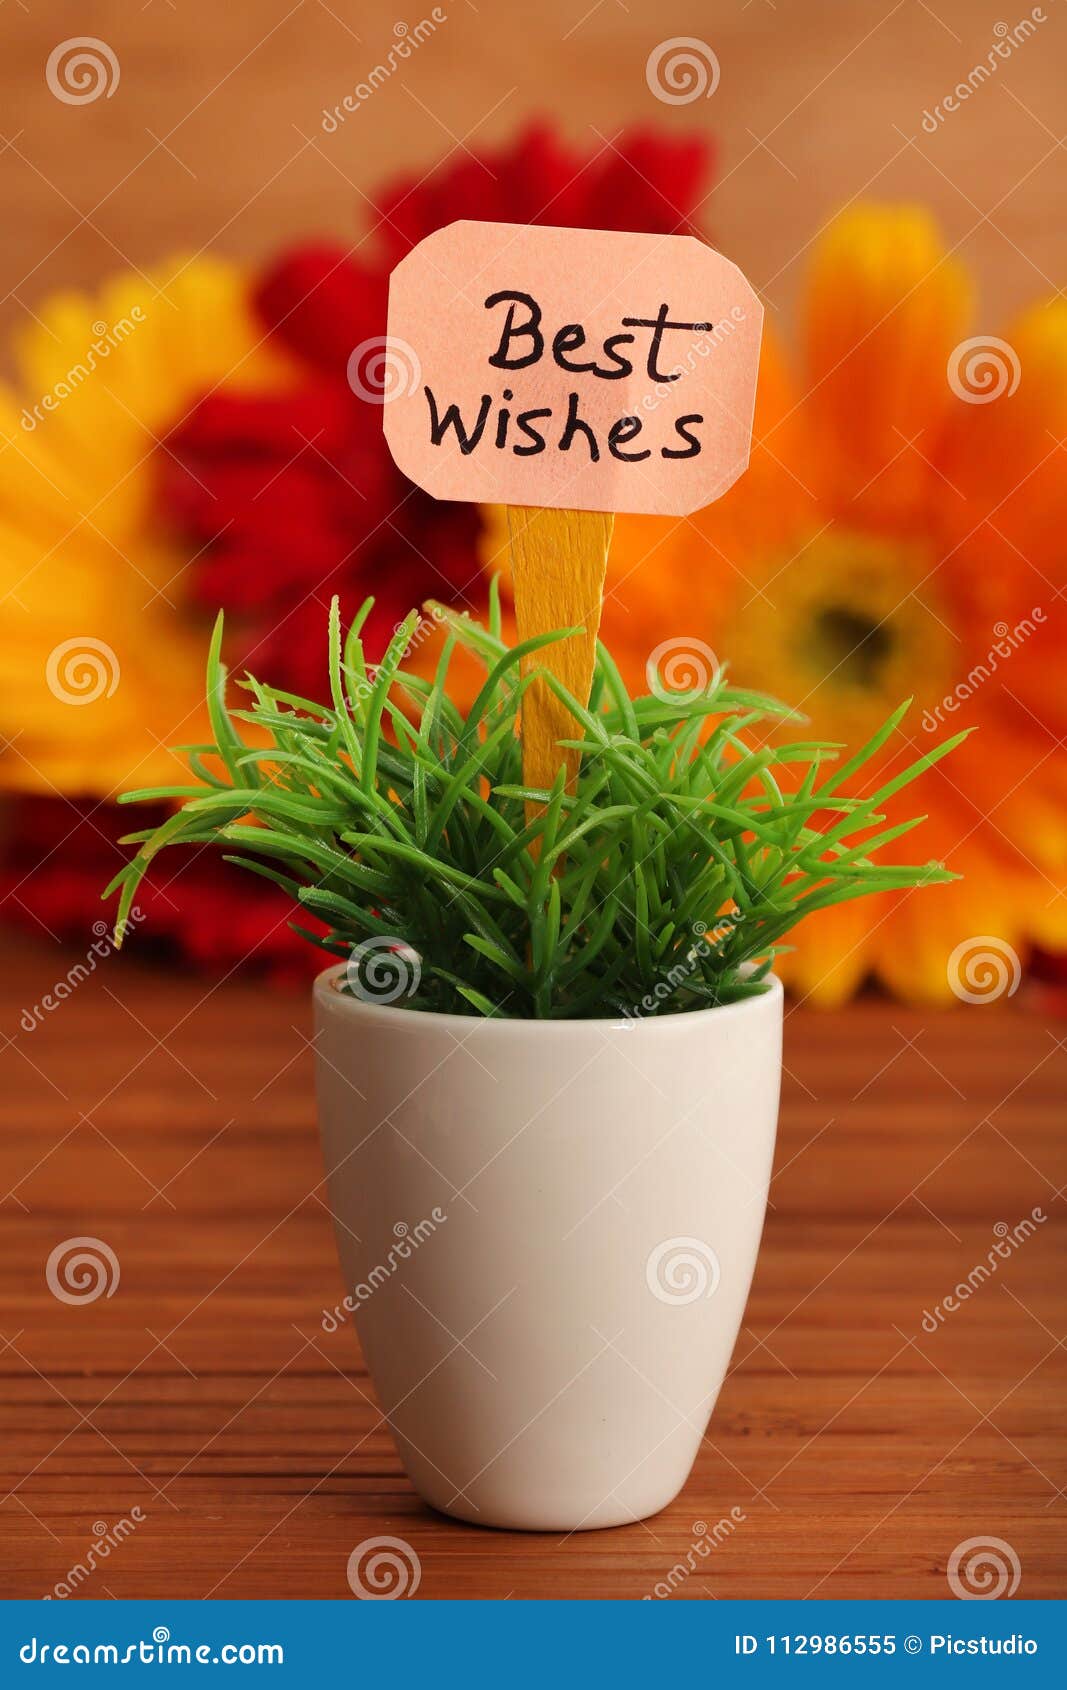 8,573 Best Wishes Stock Photos - Free & Royalty-Free Stock Photos ...